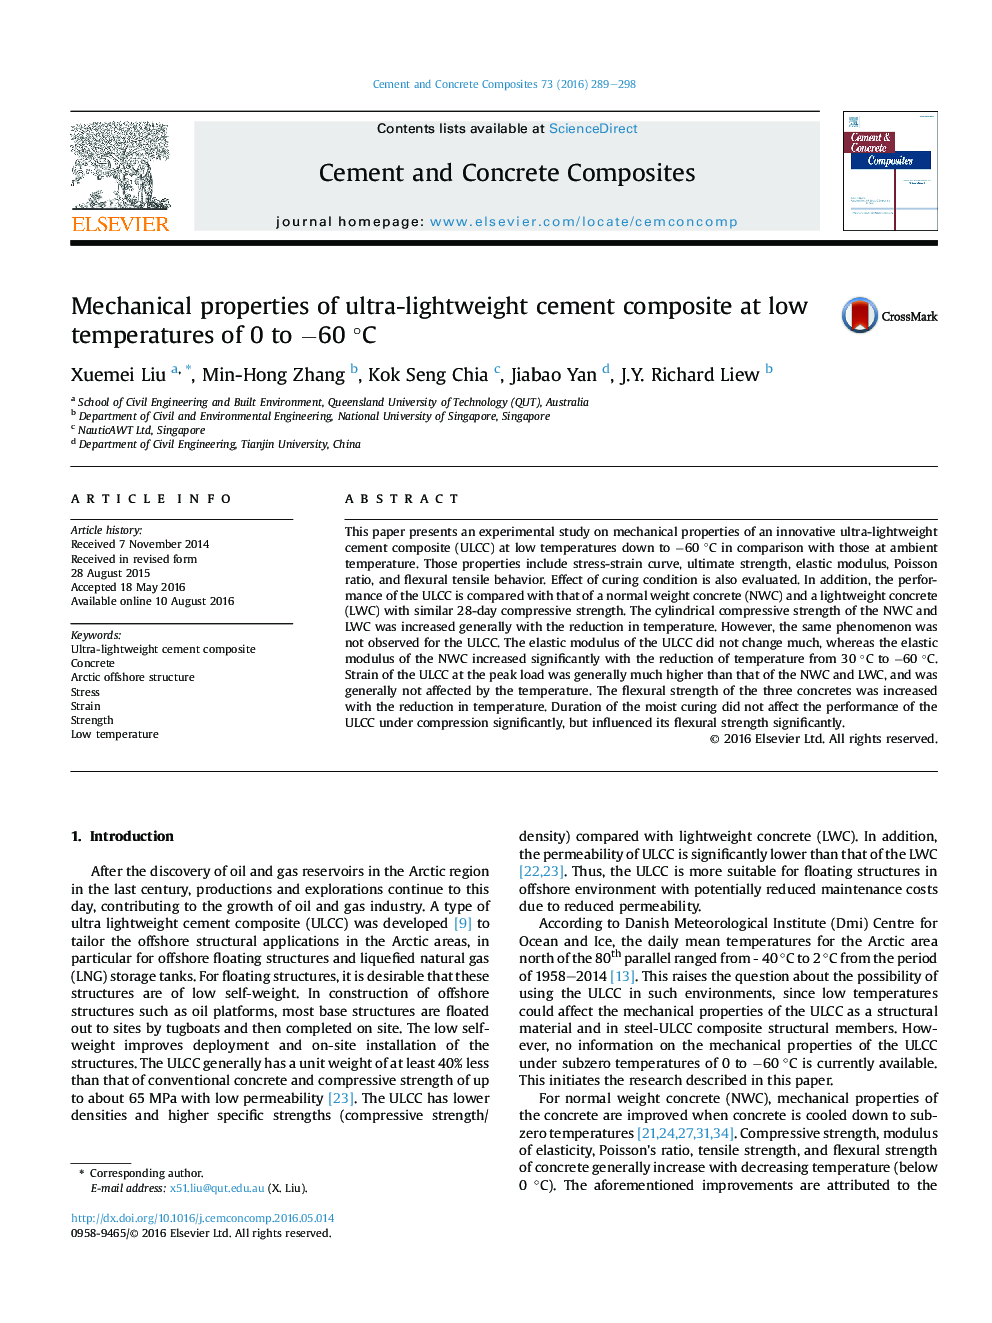 Mechanical properties of ultra-lightweight cement composite at low temperatures of 0 to −60 °C